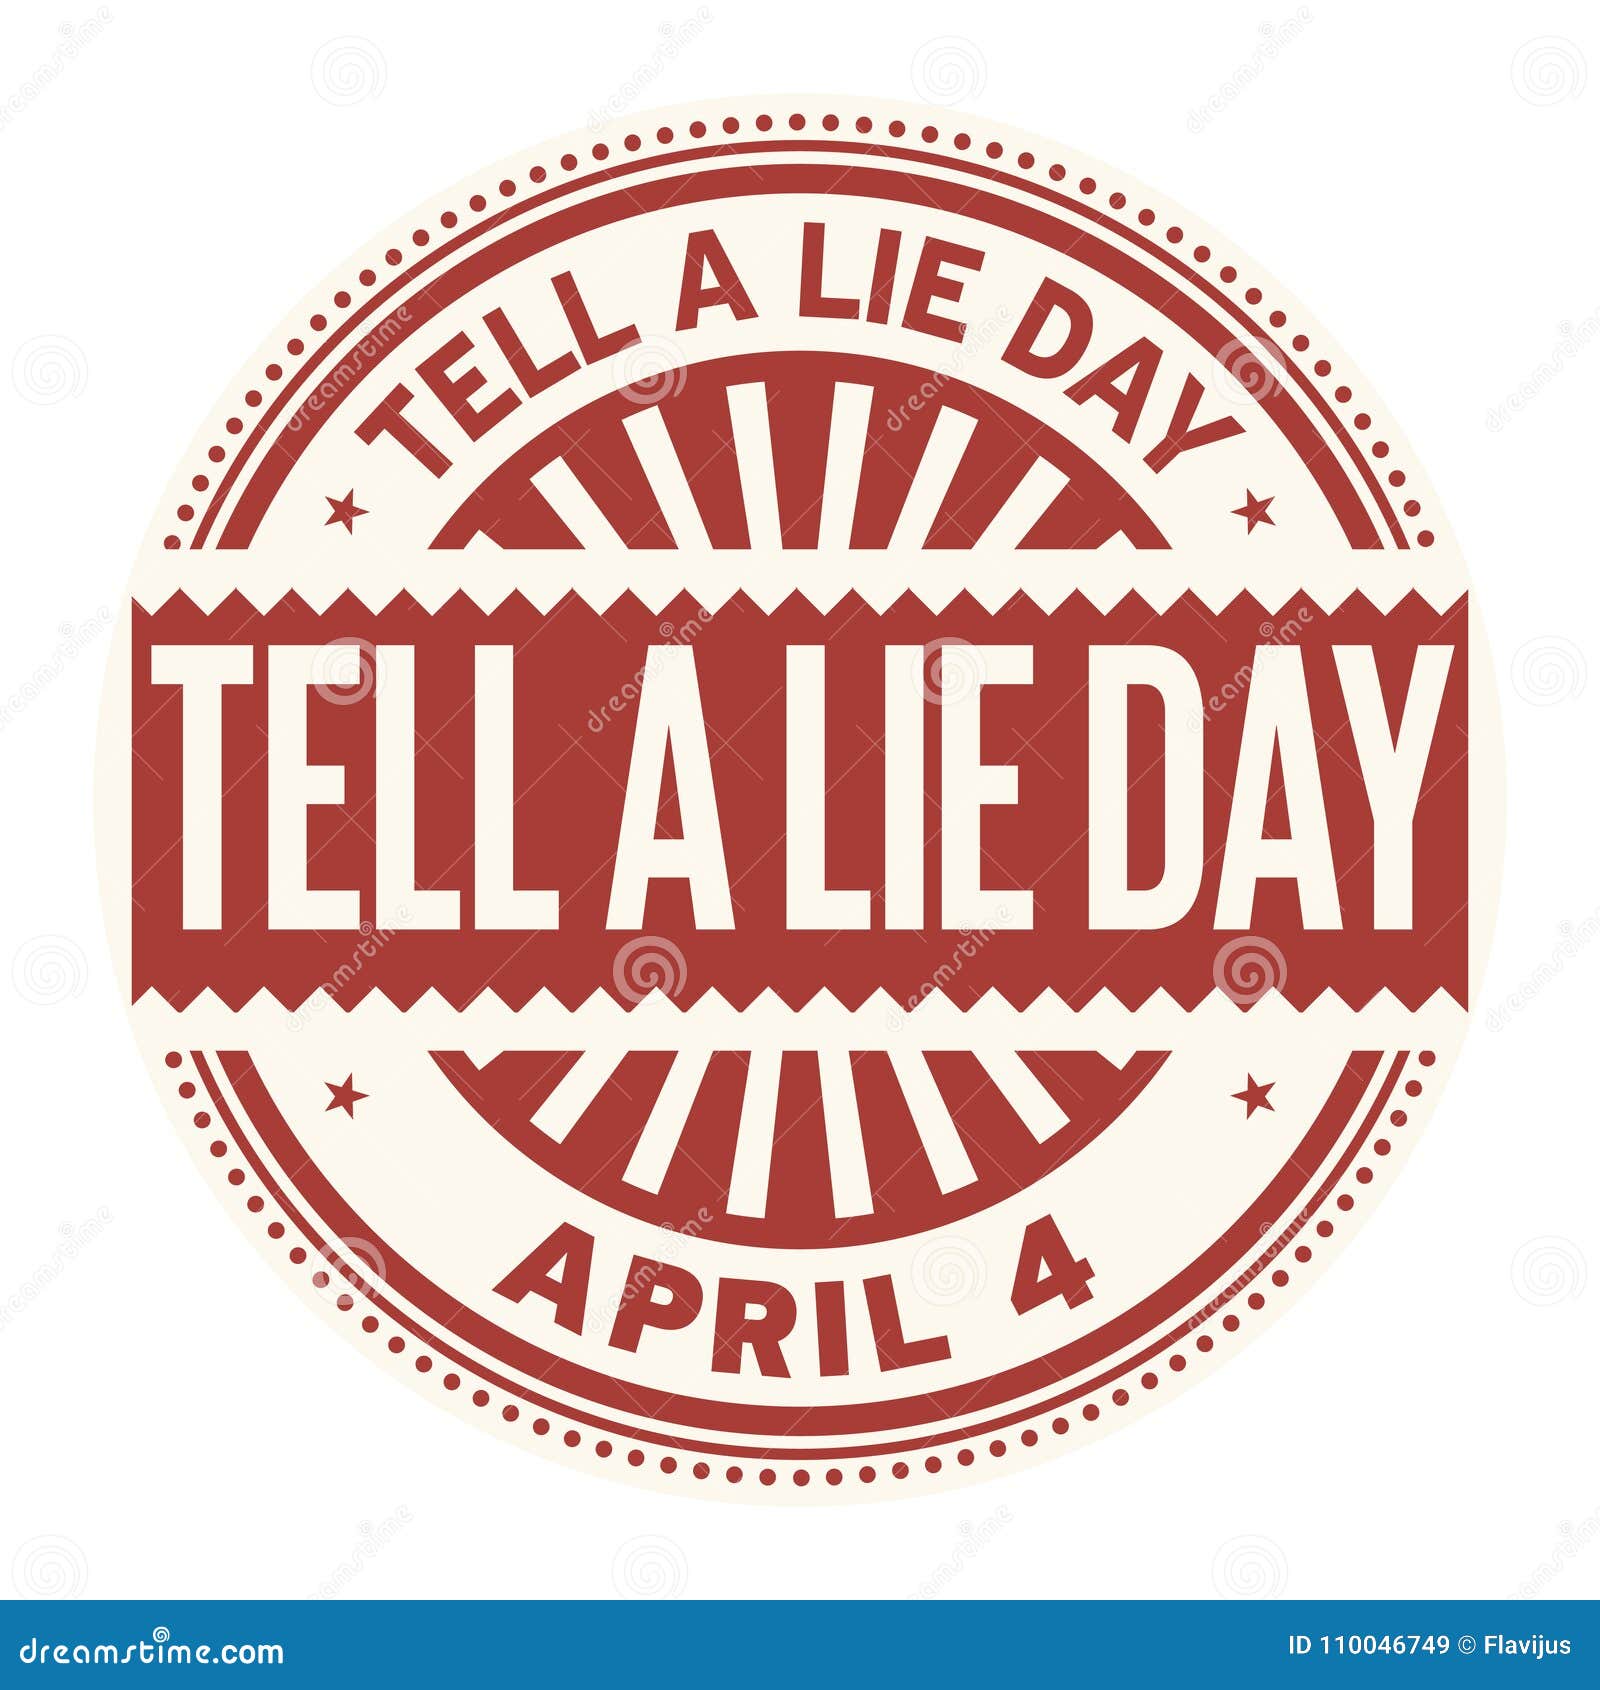 Tell a Lie Day stamp stock vector. Illustration of hear 110046749